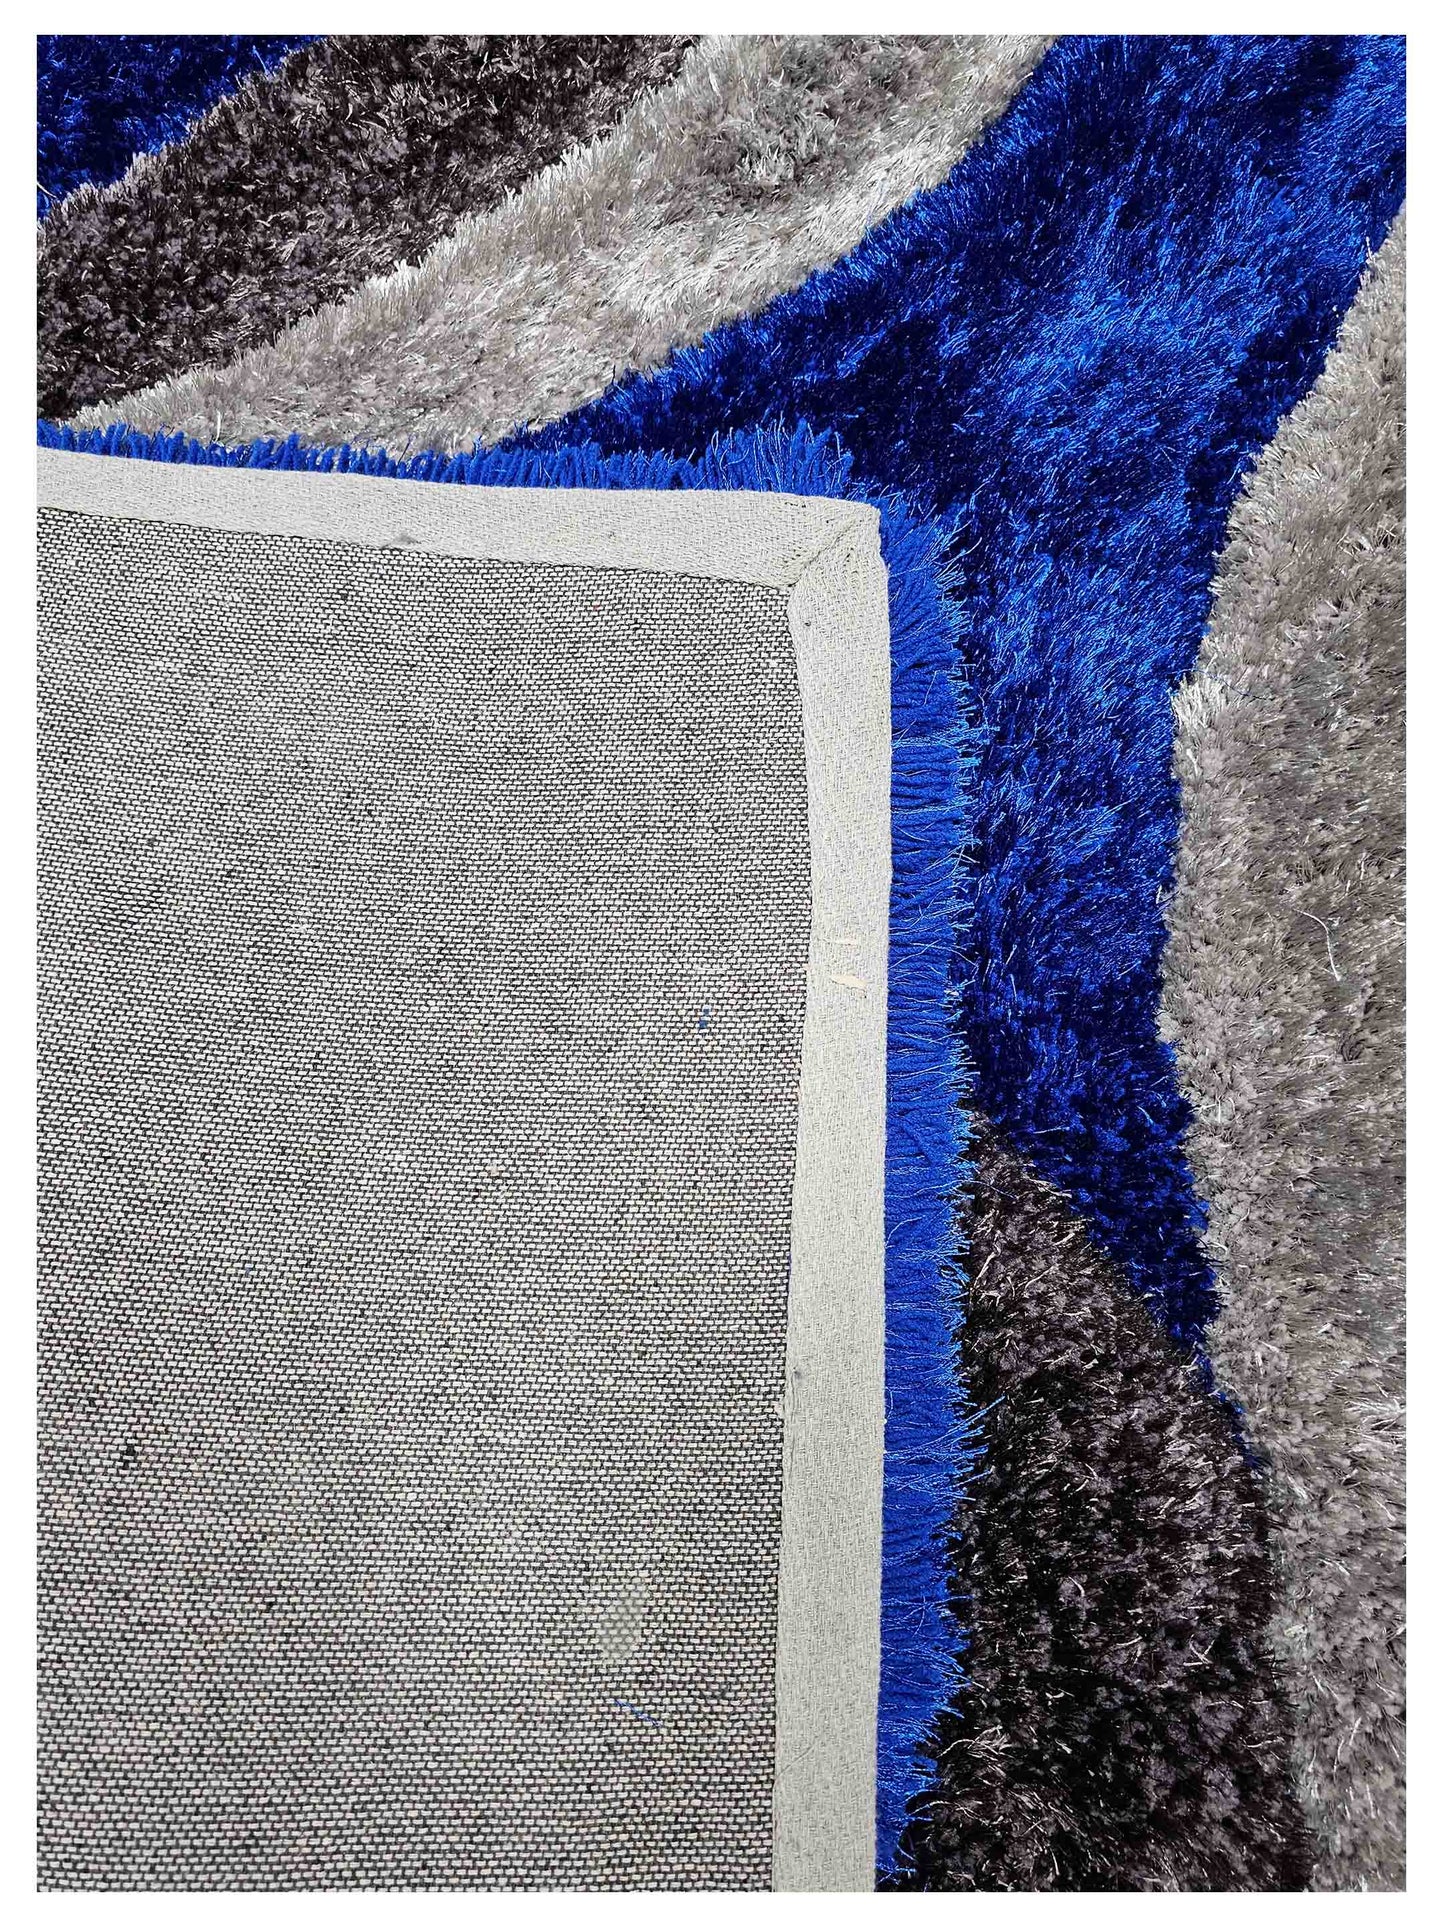 American Cover Design 3D Shaggy 3D 805 Electric Blue   Modern Tufted Rug